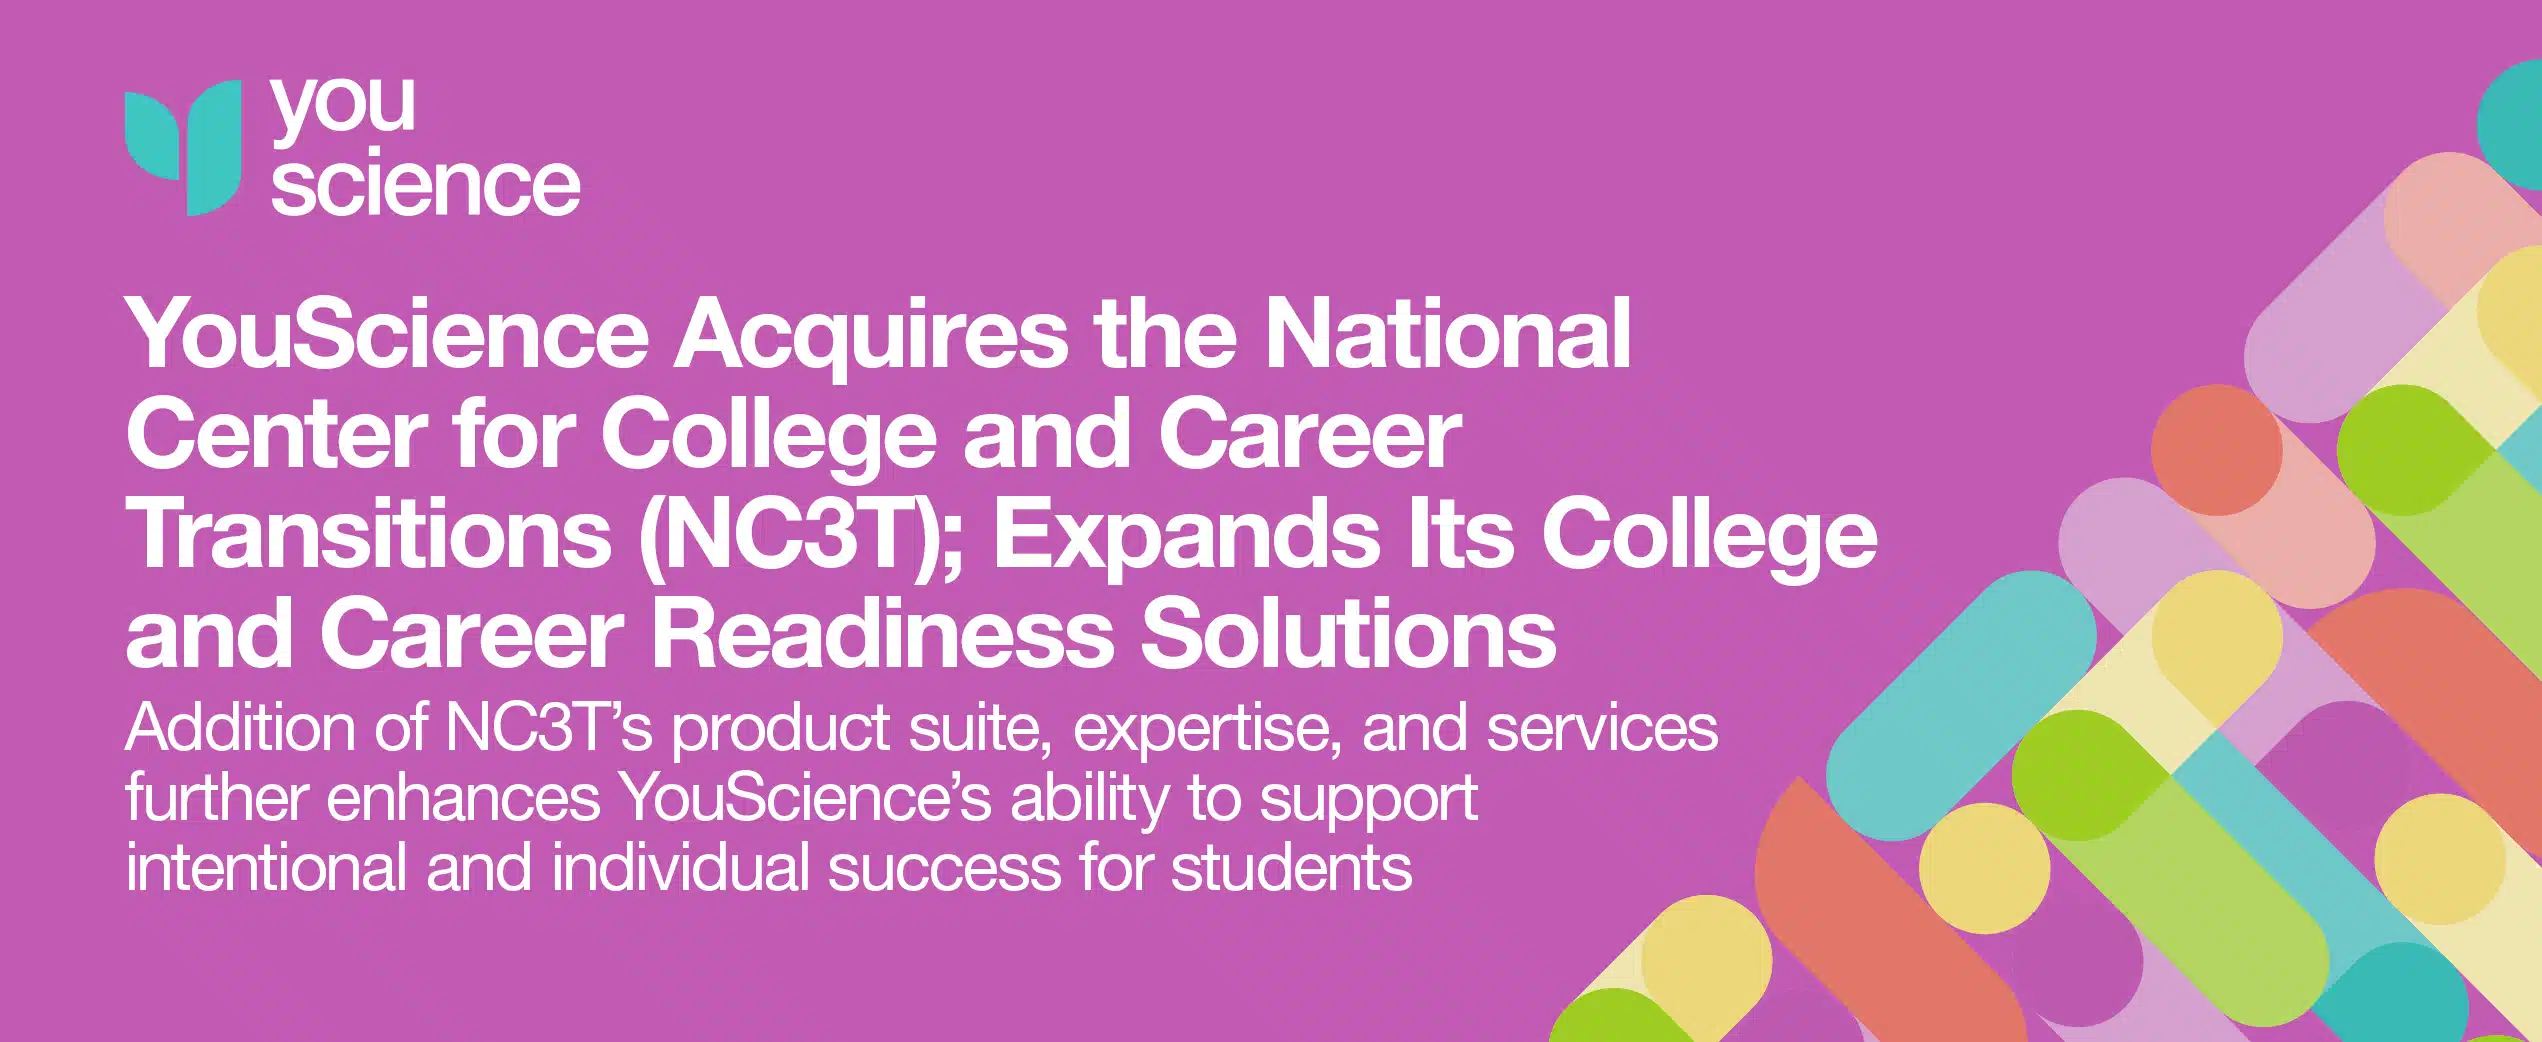 YouScience Acquires the National Center for College and Career Transitions (NC3T); Expands Its College and Career Readiness Solutions 